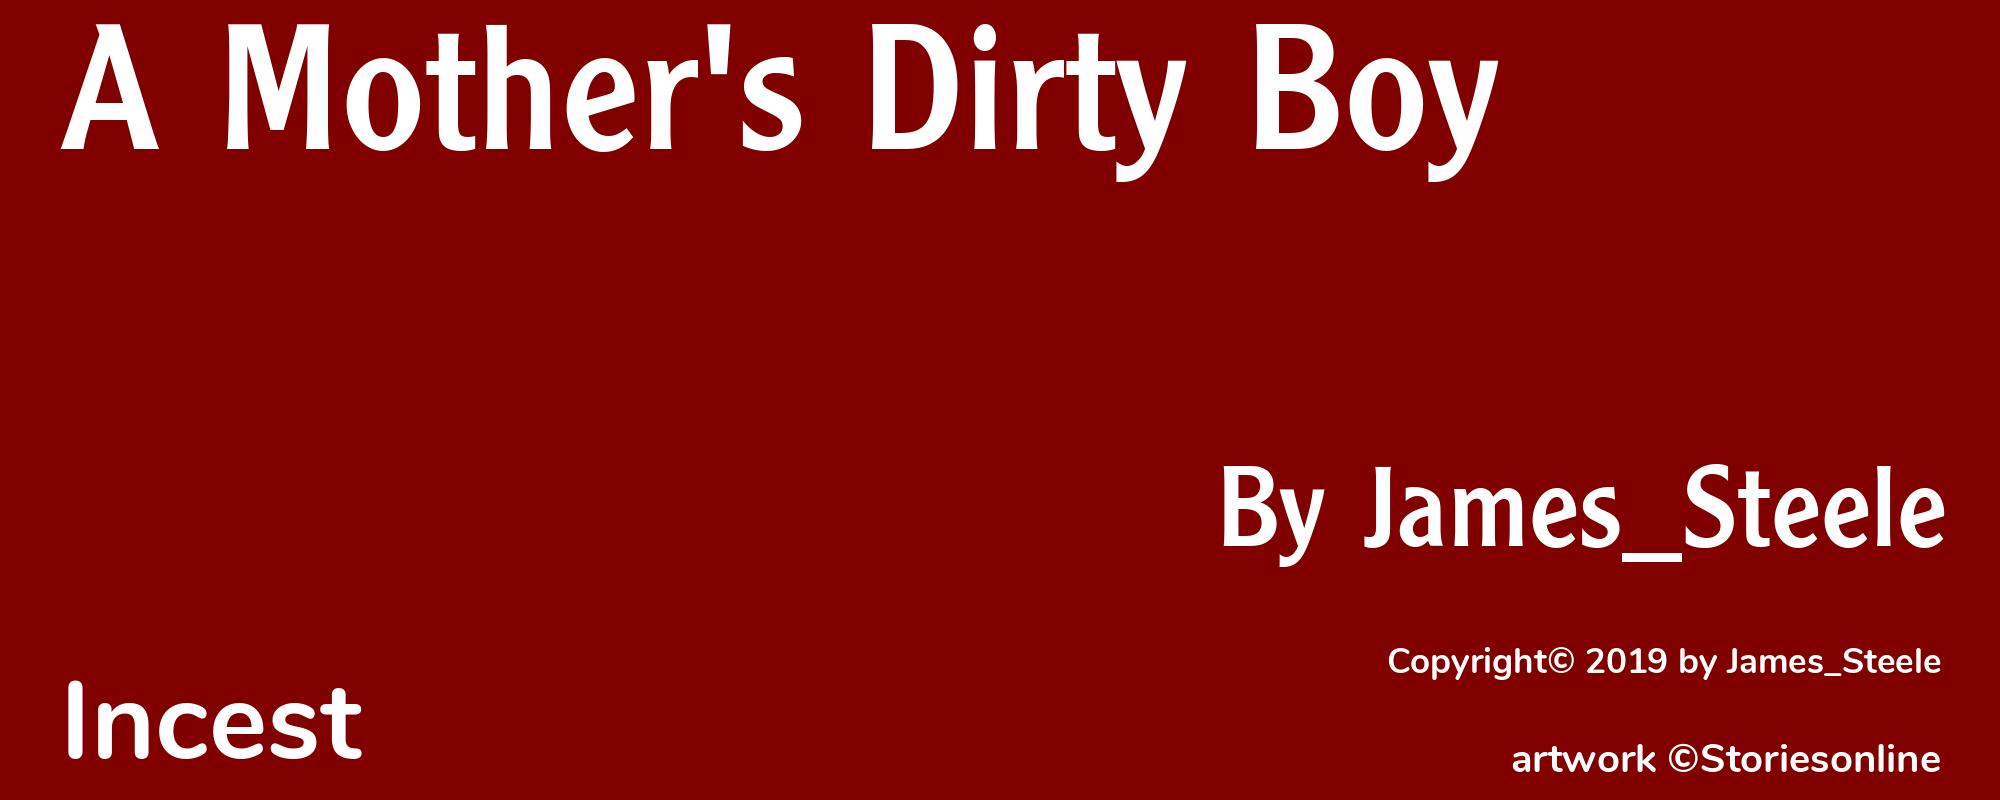 A Mother's Dirty Boy - Cover